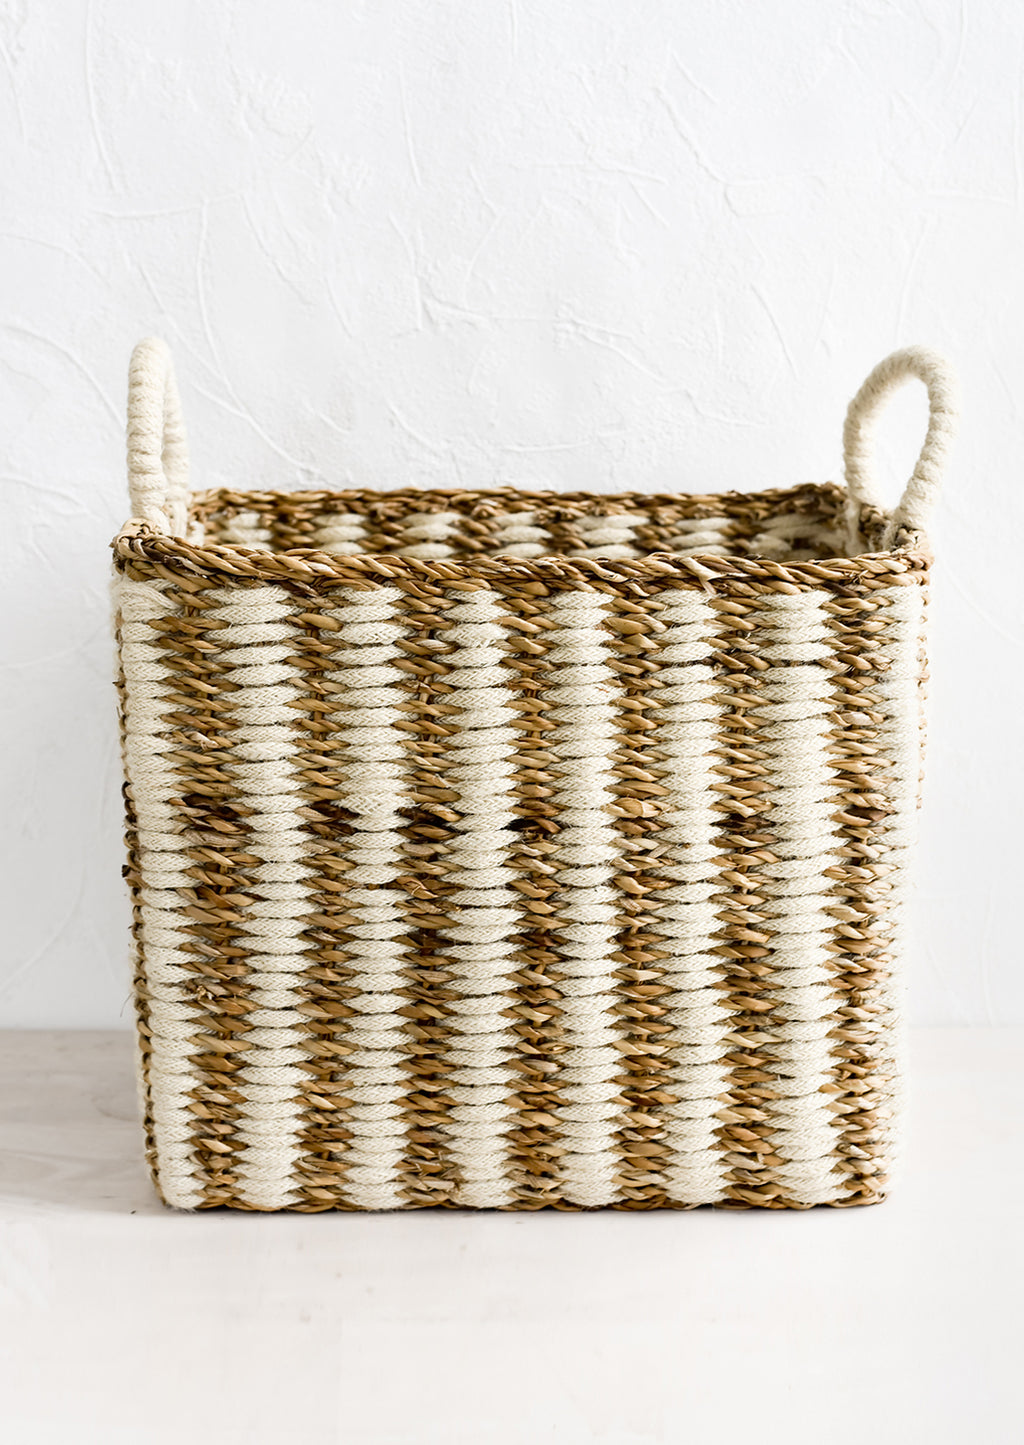 Large [$98.00]: A square storage basket in woven straw and jute, large size.